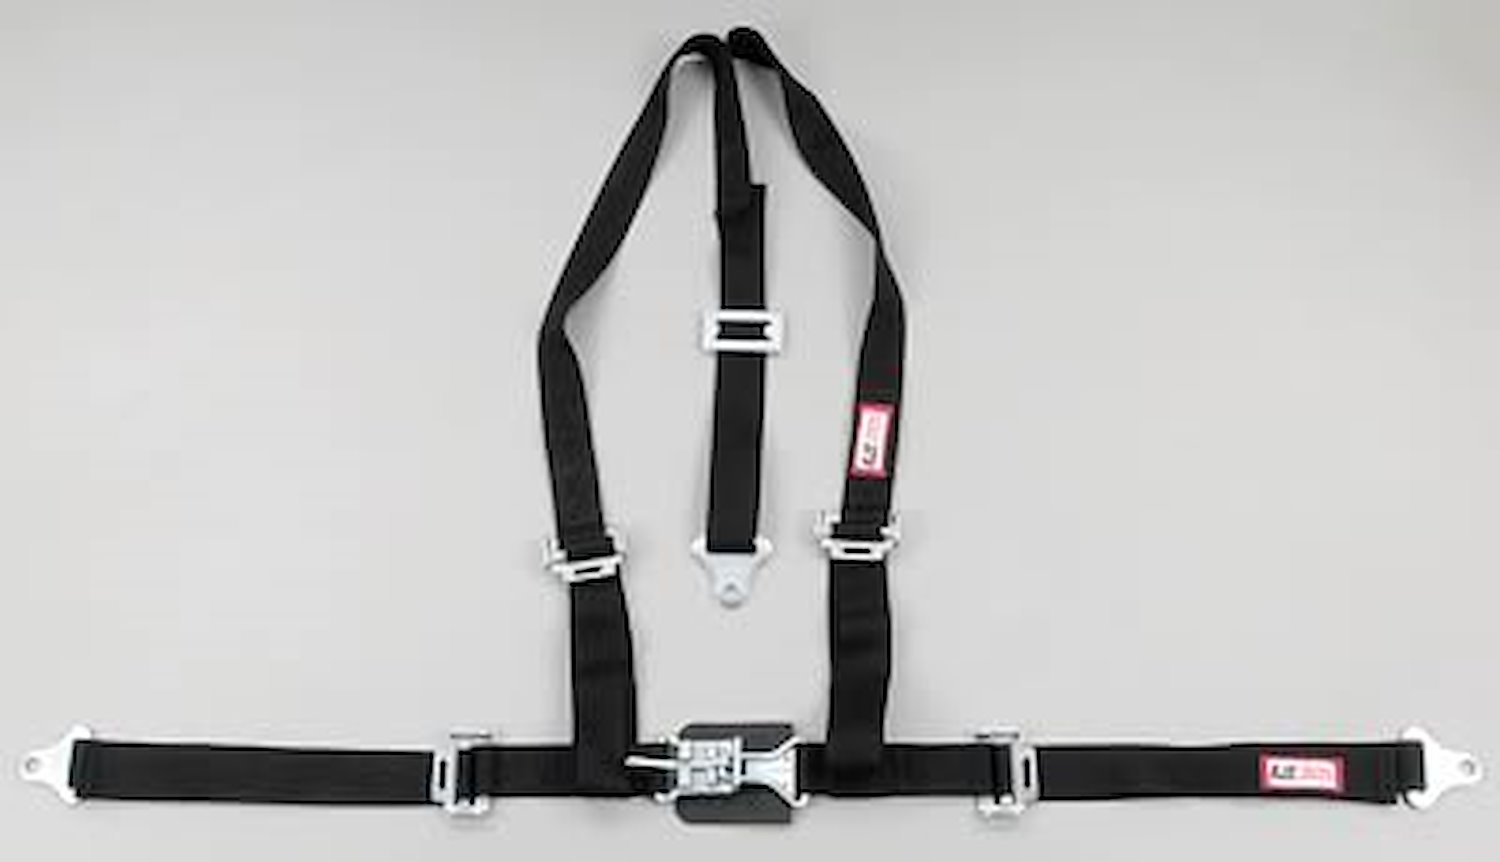 NON-SFI L&L HARNESS 3 PULL UP Lap BELT SNAP SEWN IN 2 S.H. Y FLOOR Mount w/STERNUM STRAP WRAP/BOLT BLUE